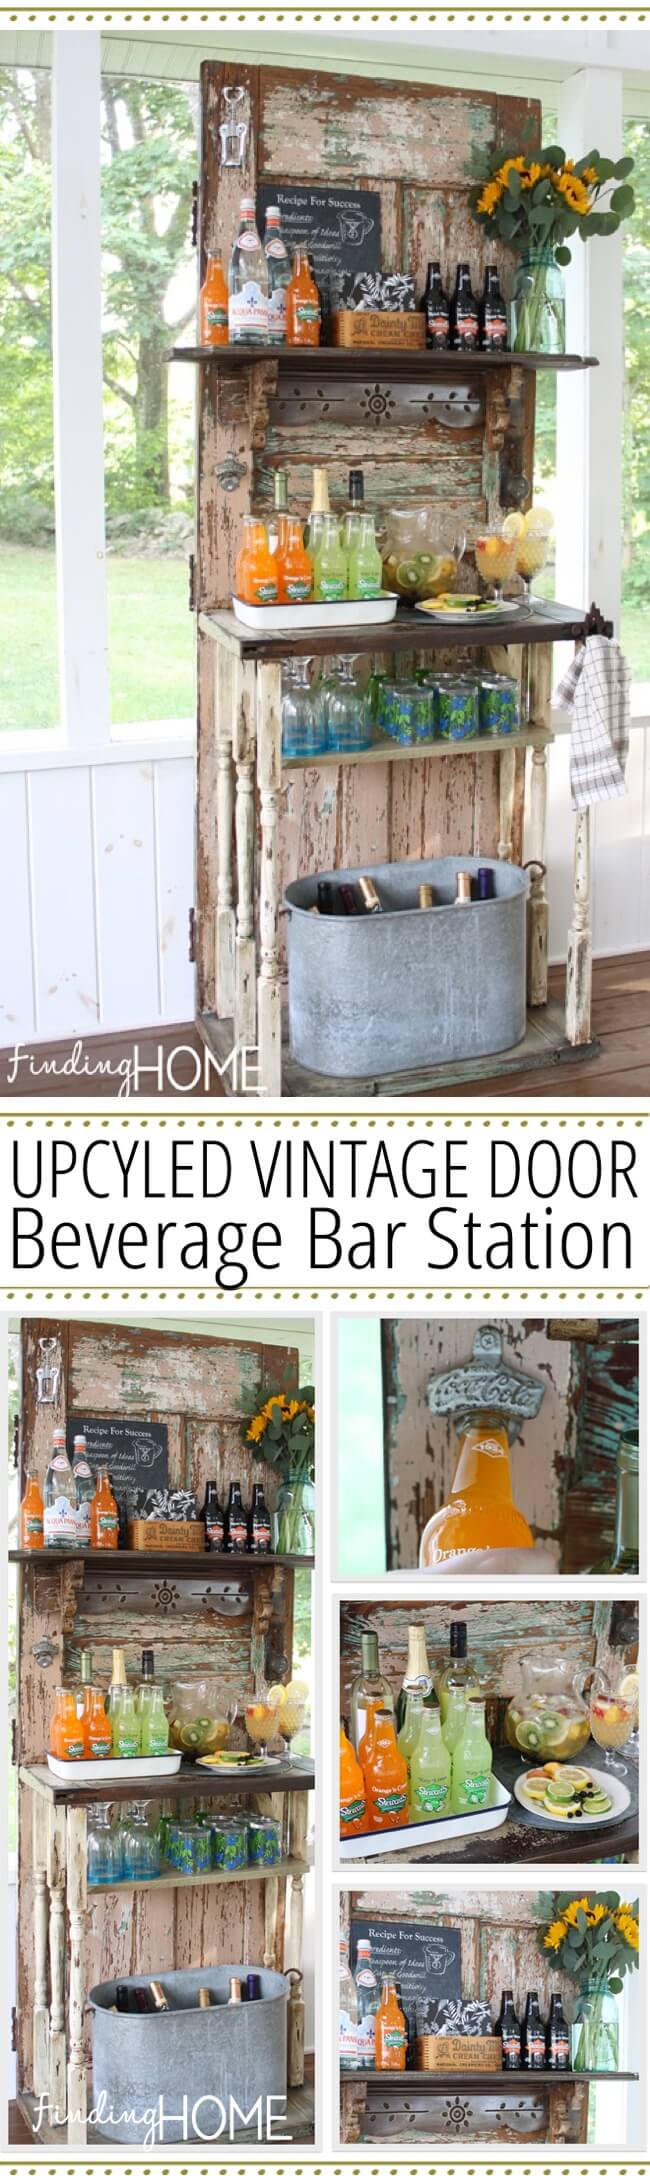 Upcycled Vintage Door Beverage Bar Station | Creative Repurposed Old Door Ideas & Projects For Your Backyard